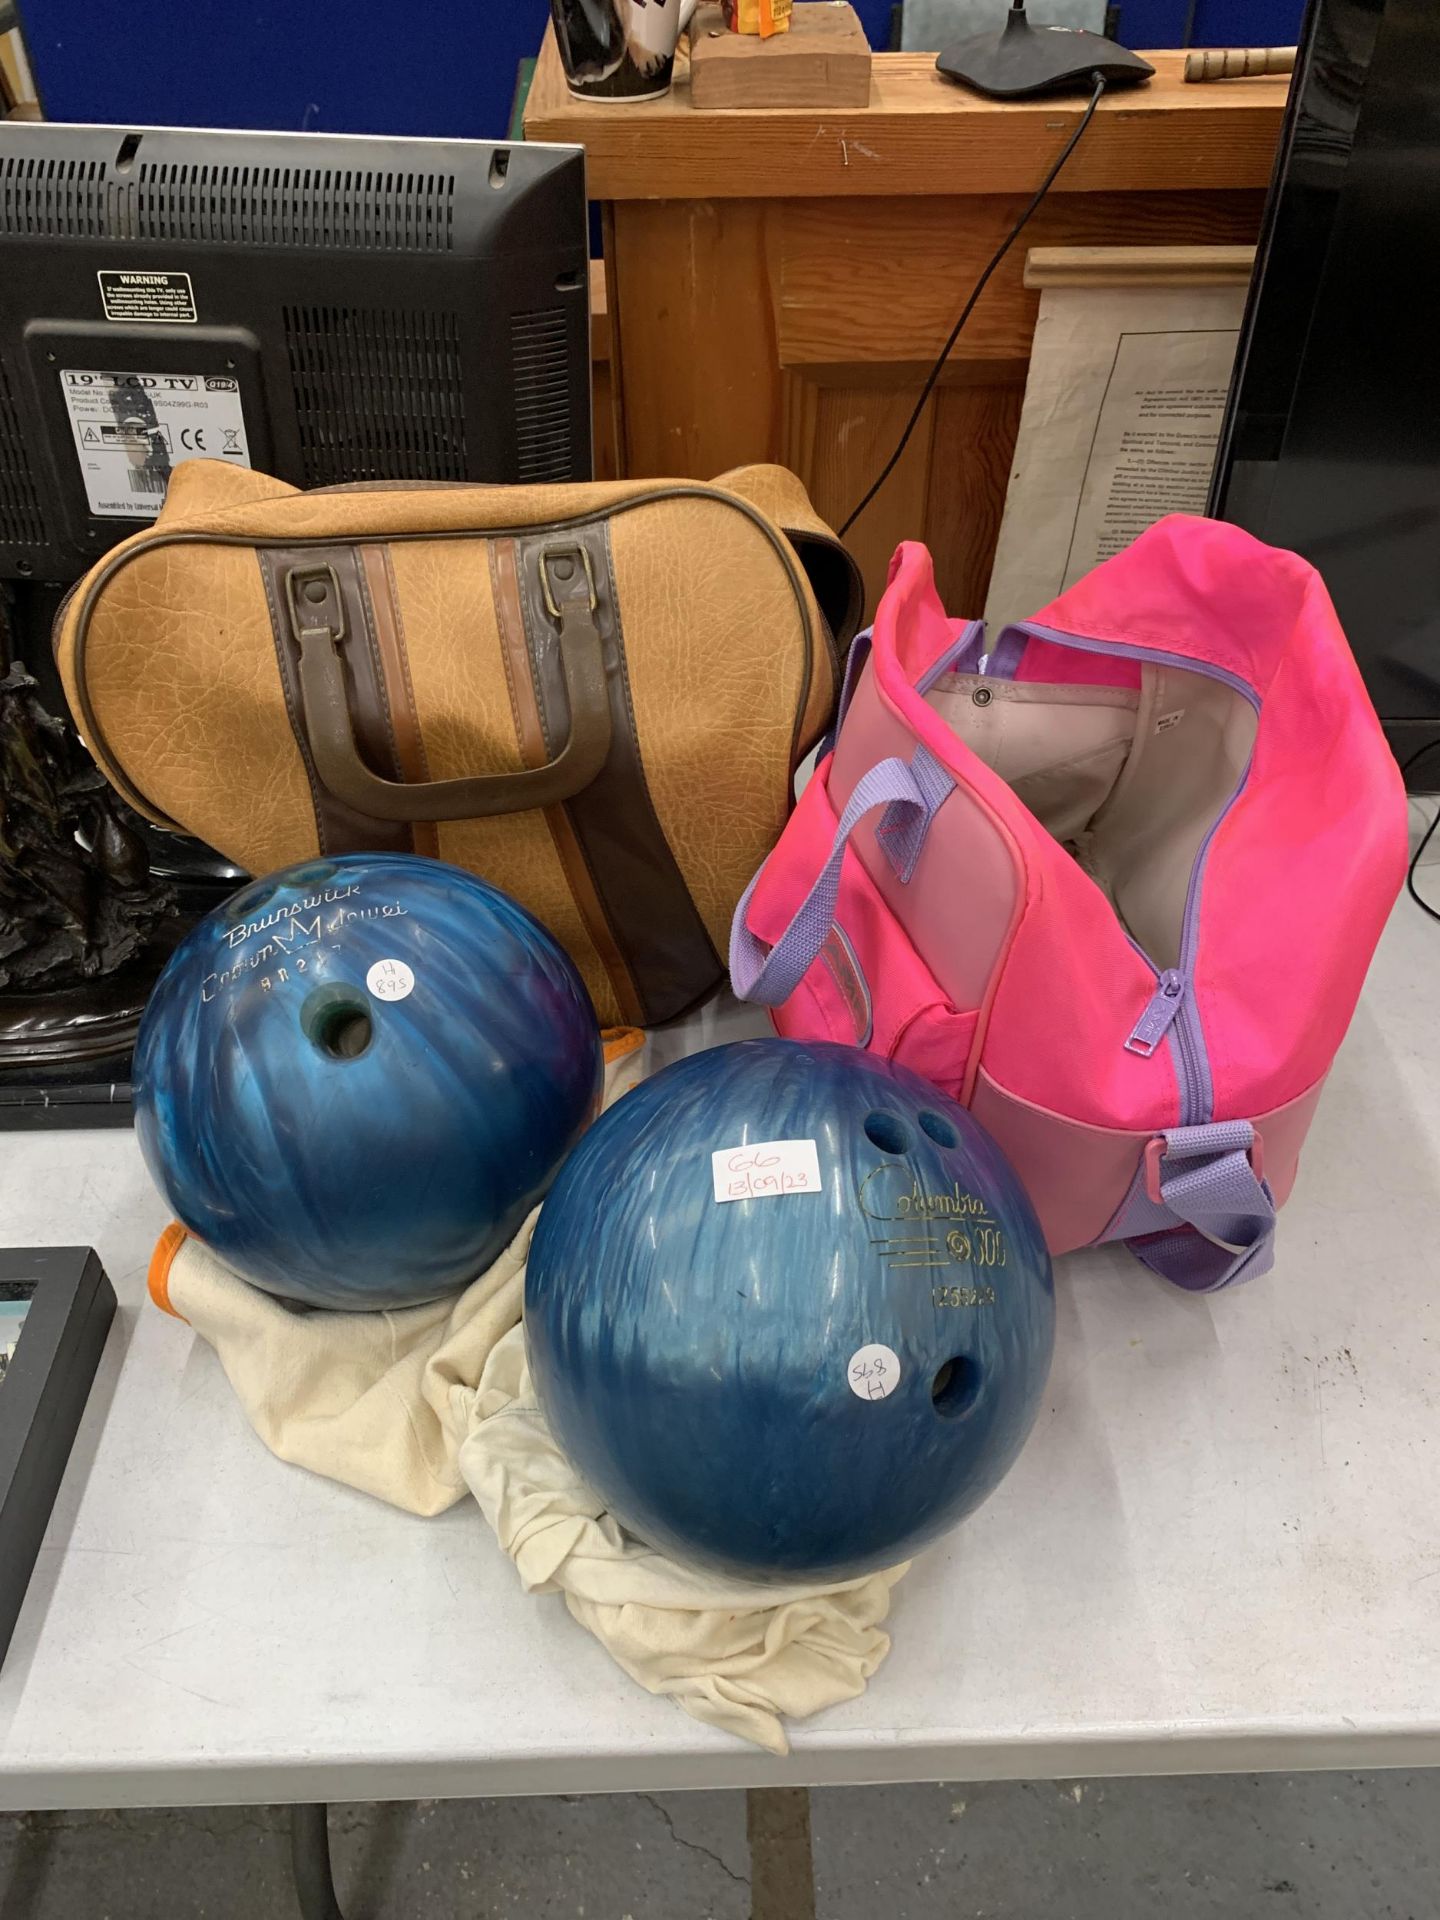 TWO TEN PIN BOWLING BALLS WITH CARRY CASES